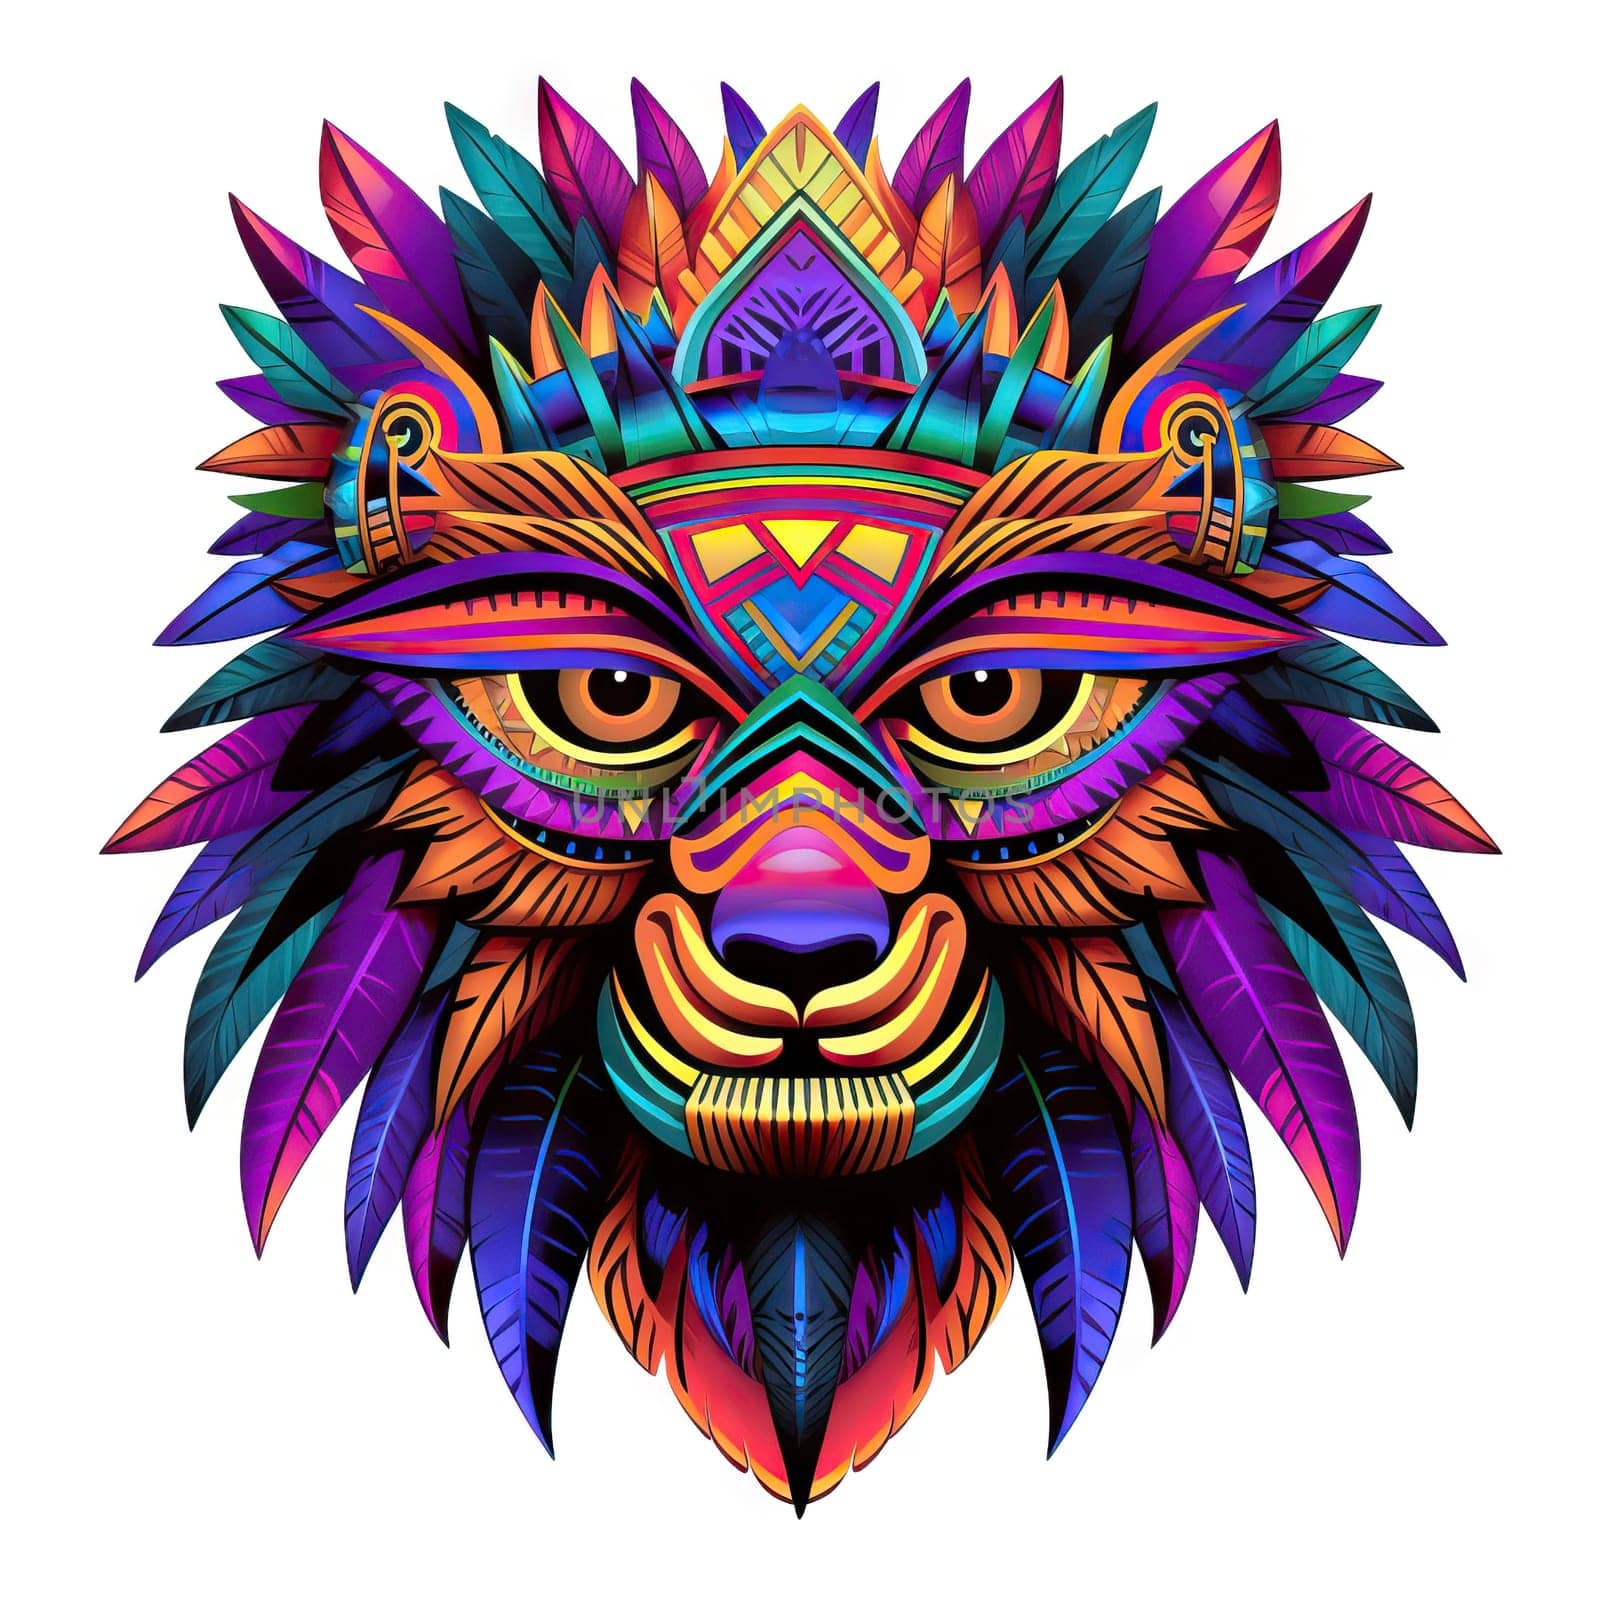 Abstract portrait of a fairy tale mystical animal in psychedelic pop art style. Isolated on a white background. Template for t-shirt print, sticker, poster, etc.